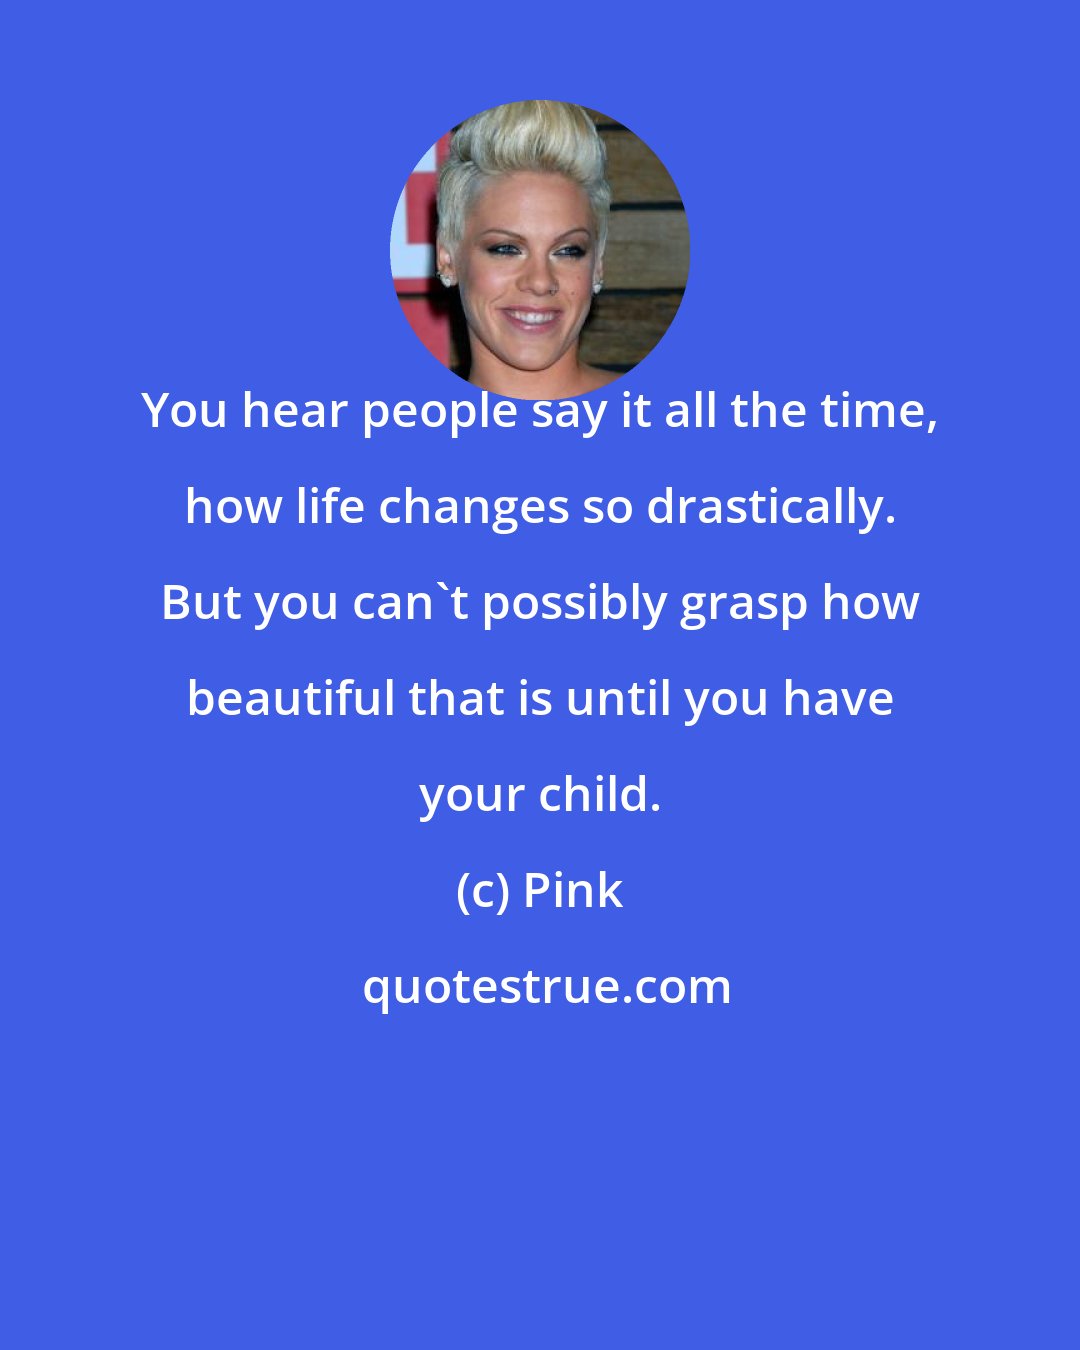 Pink: You hear people say it all the time, how life changes so drastically. But you can't possibly grasp how beautiful that is until you have your child.